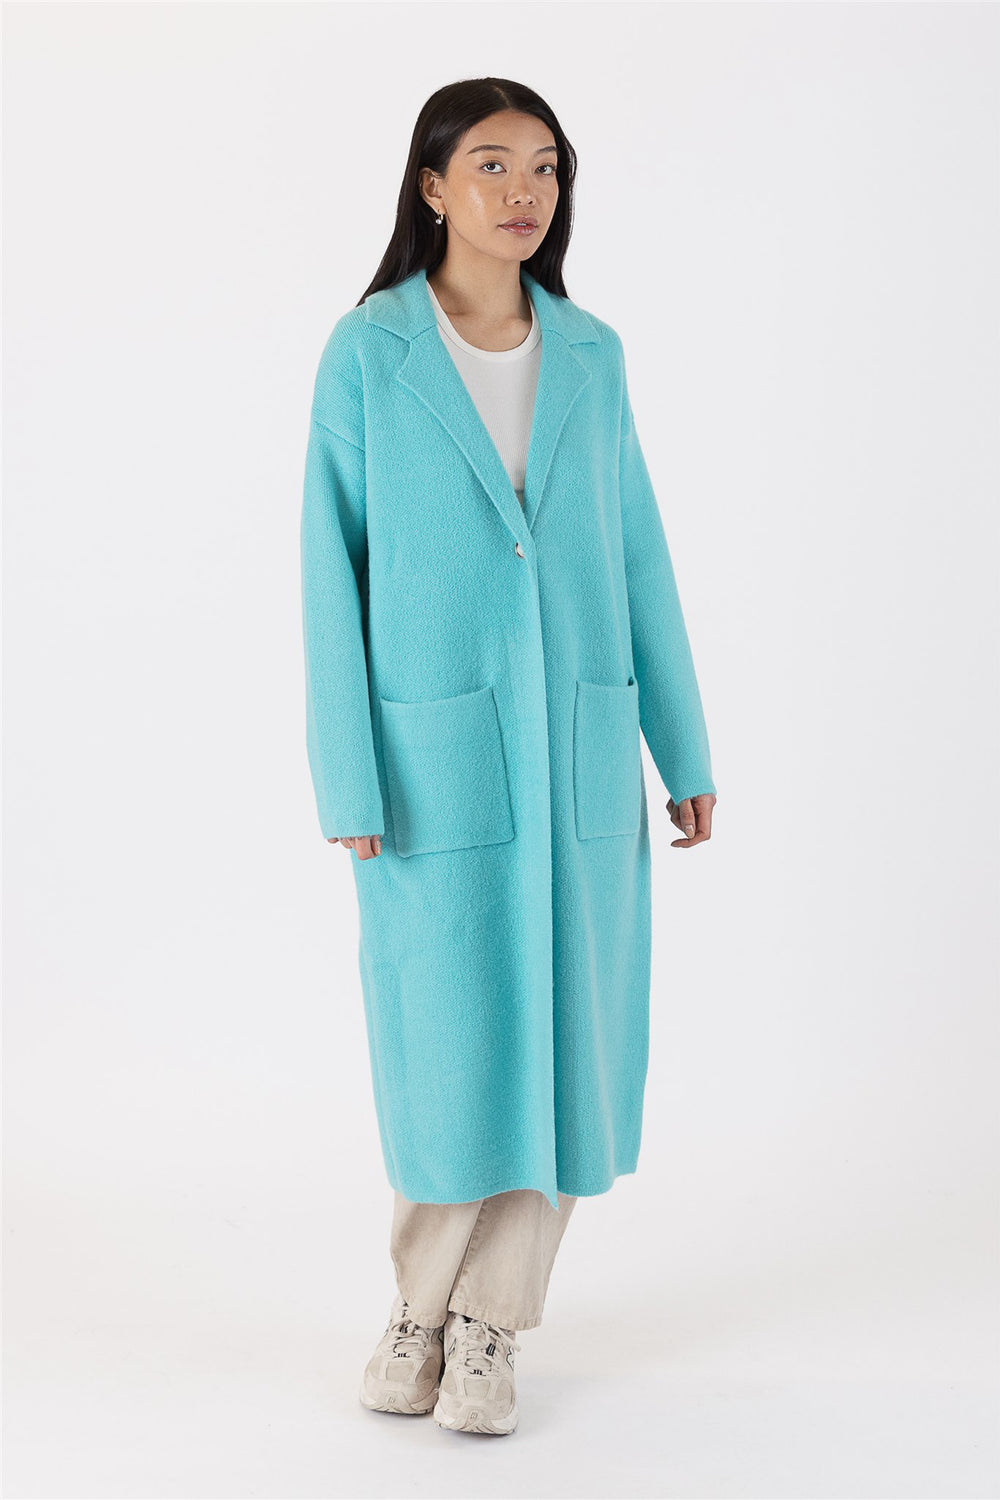 Lyla + Luxe Fiona Fitted Coat – honey